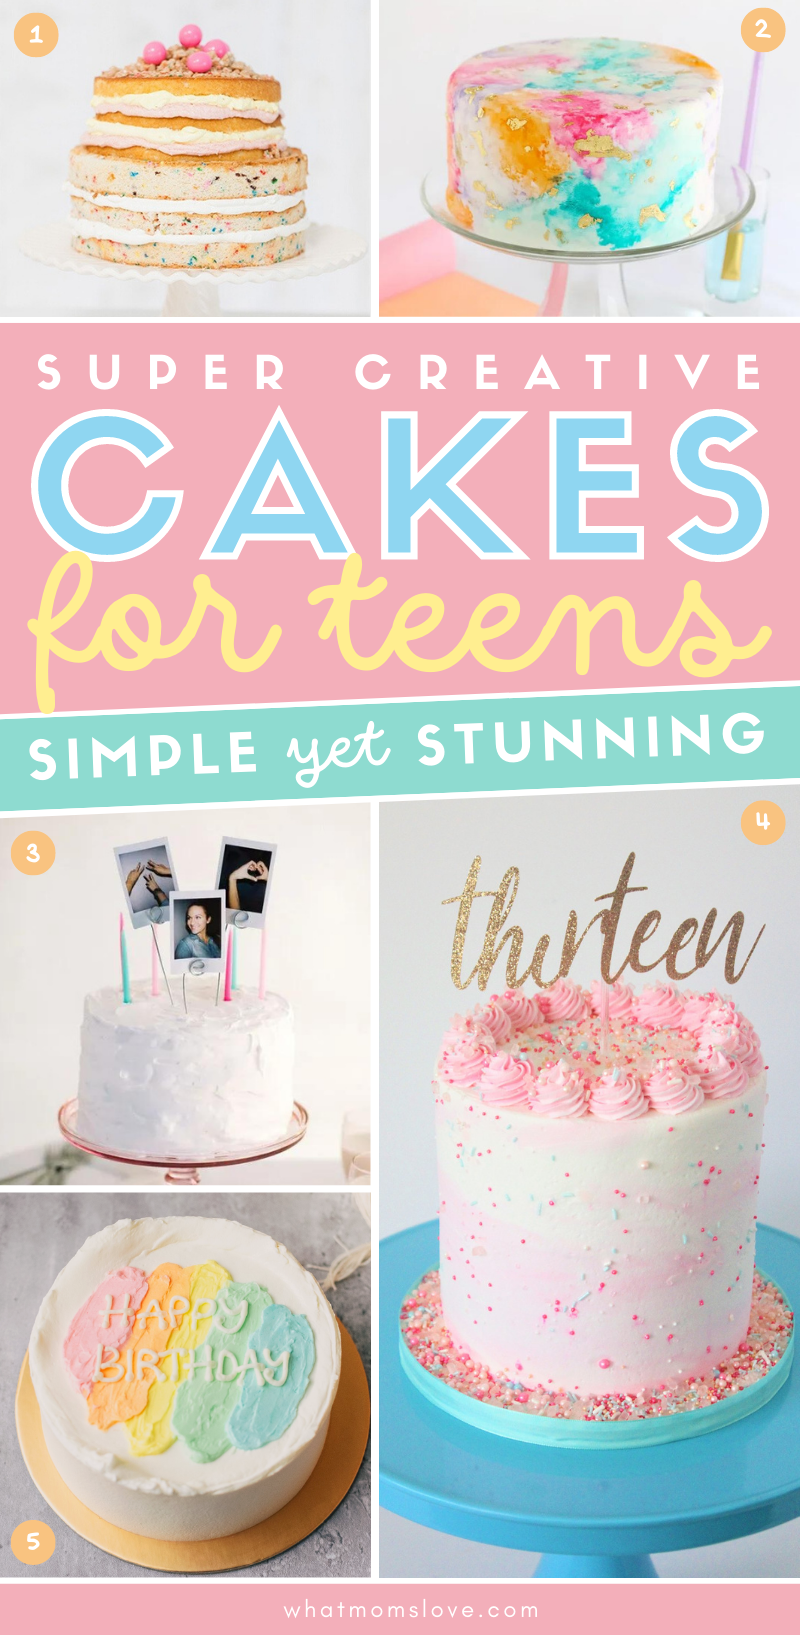 https://cdn.whatmomslove.com/wp-content/uploads/2022/05/Teenager-Birthday-Cakes-Ideas-Easy-Simple-PIN.png